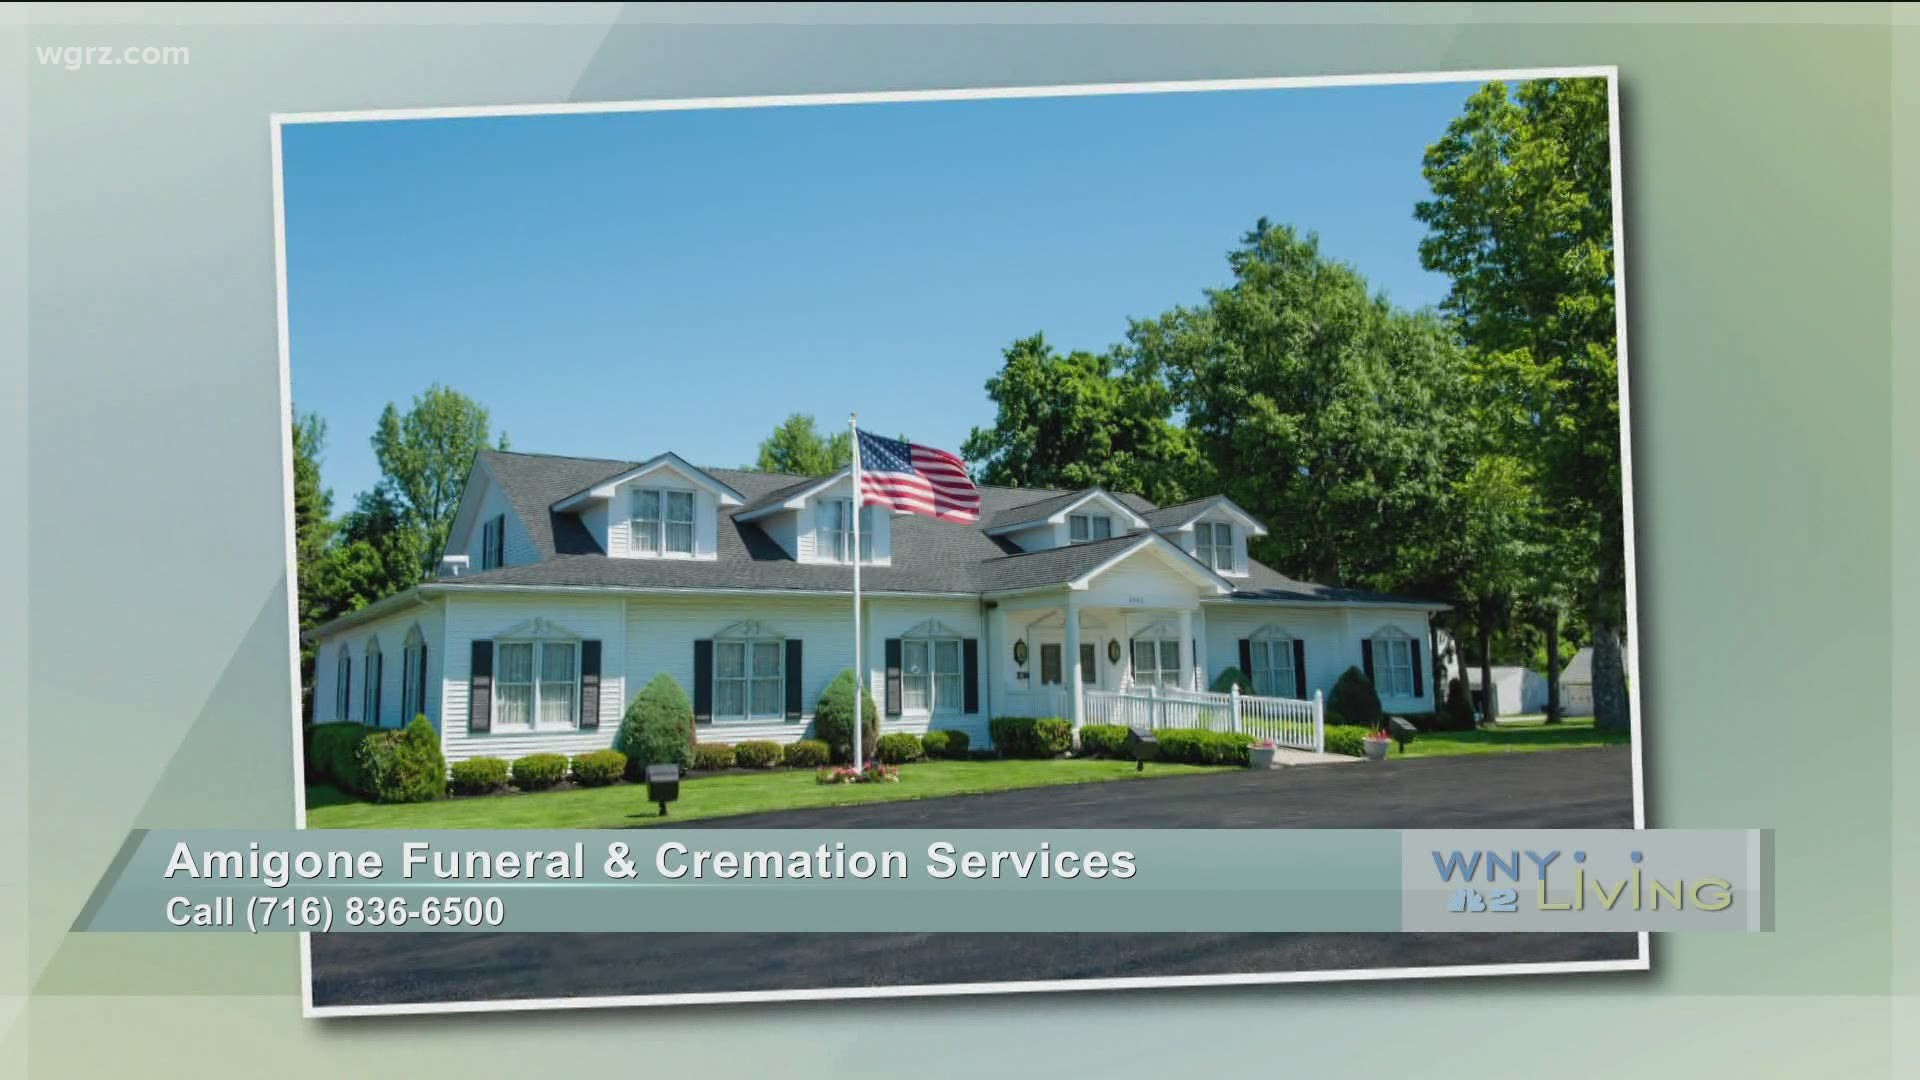 WNY Living - October 24 - Amigone Funeral & Cremation Services (THIS VIDEO IS SPONSORED BY AMIGONE FUNERAL & CREMATIN SERVICES)